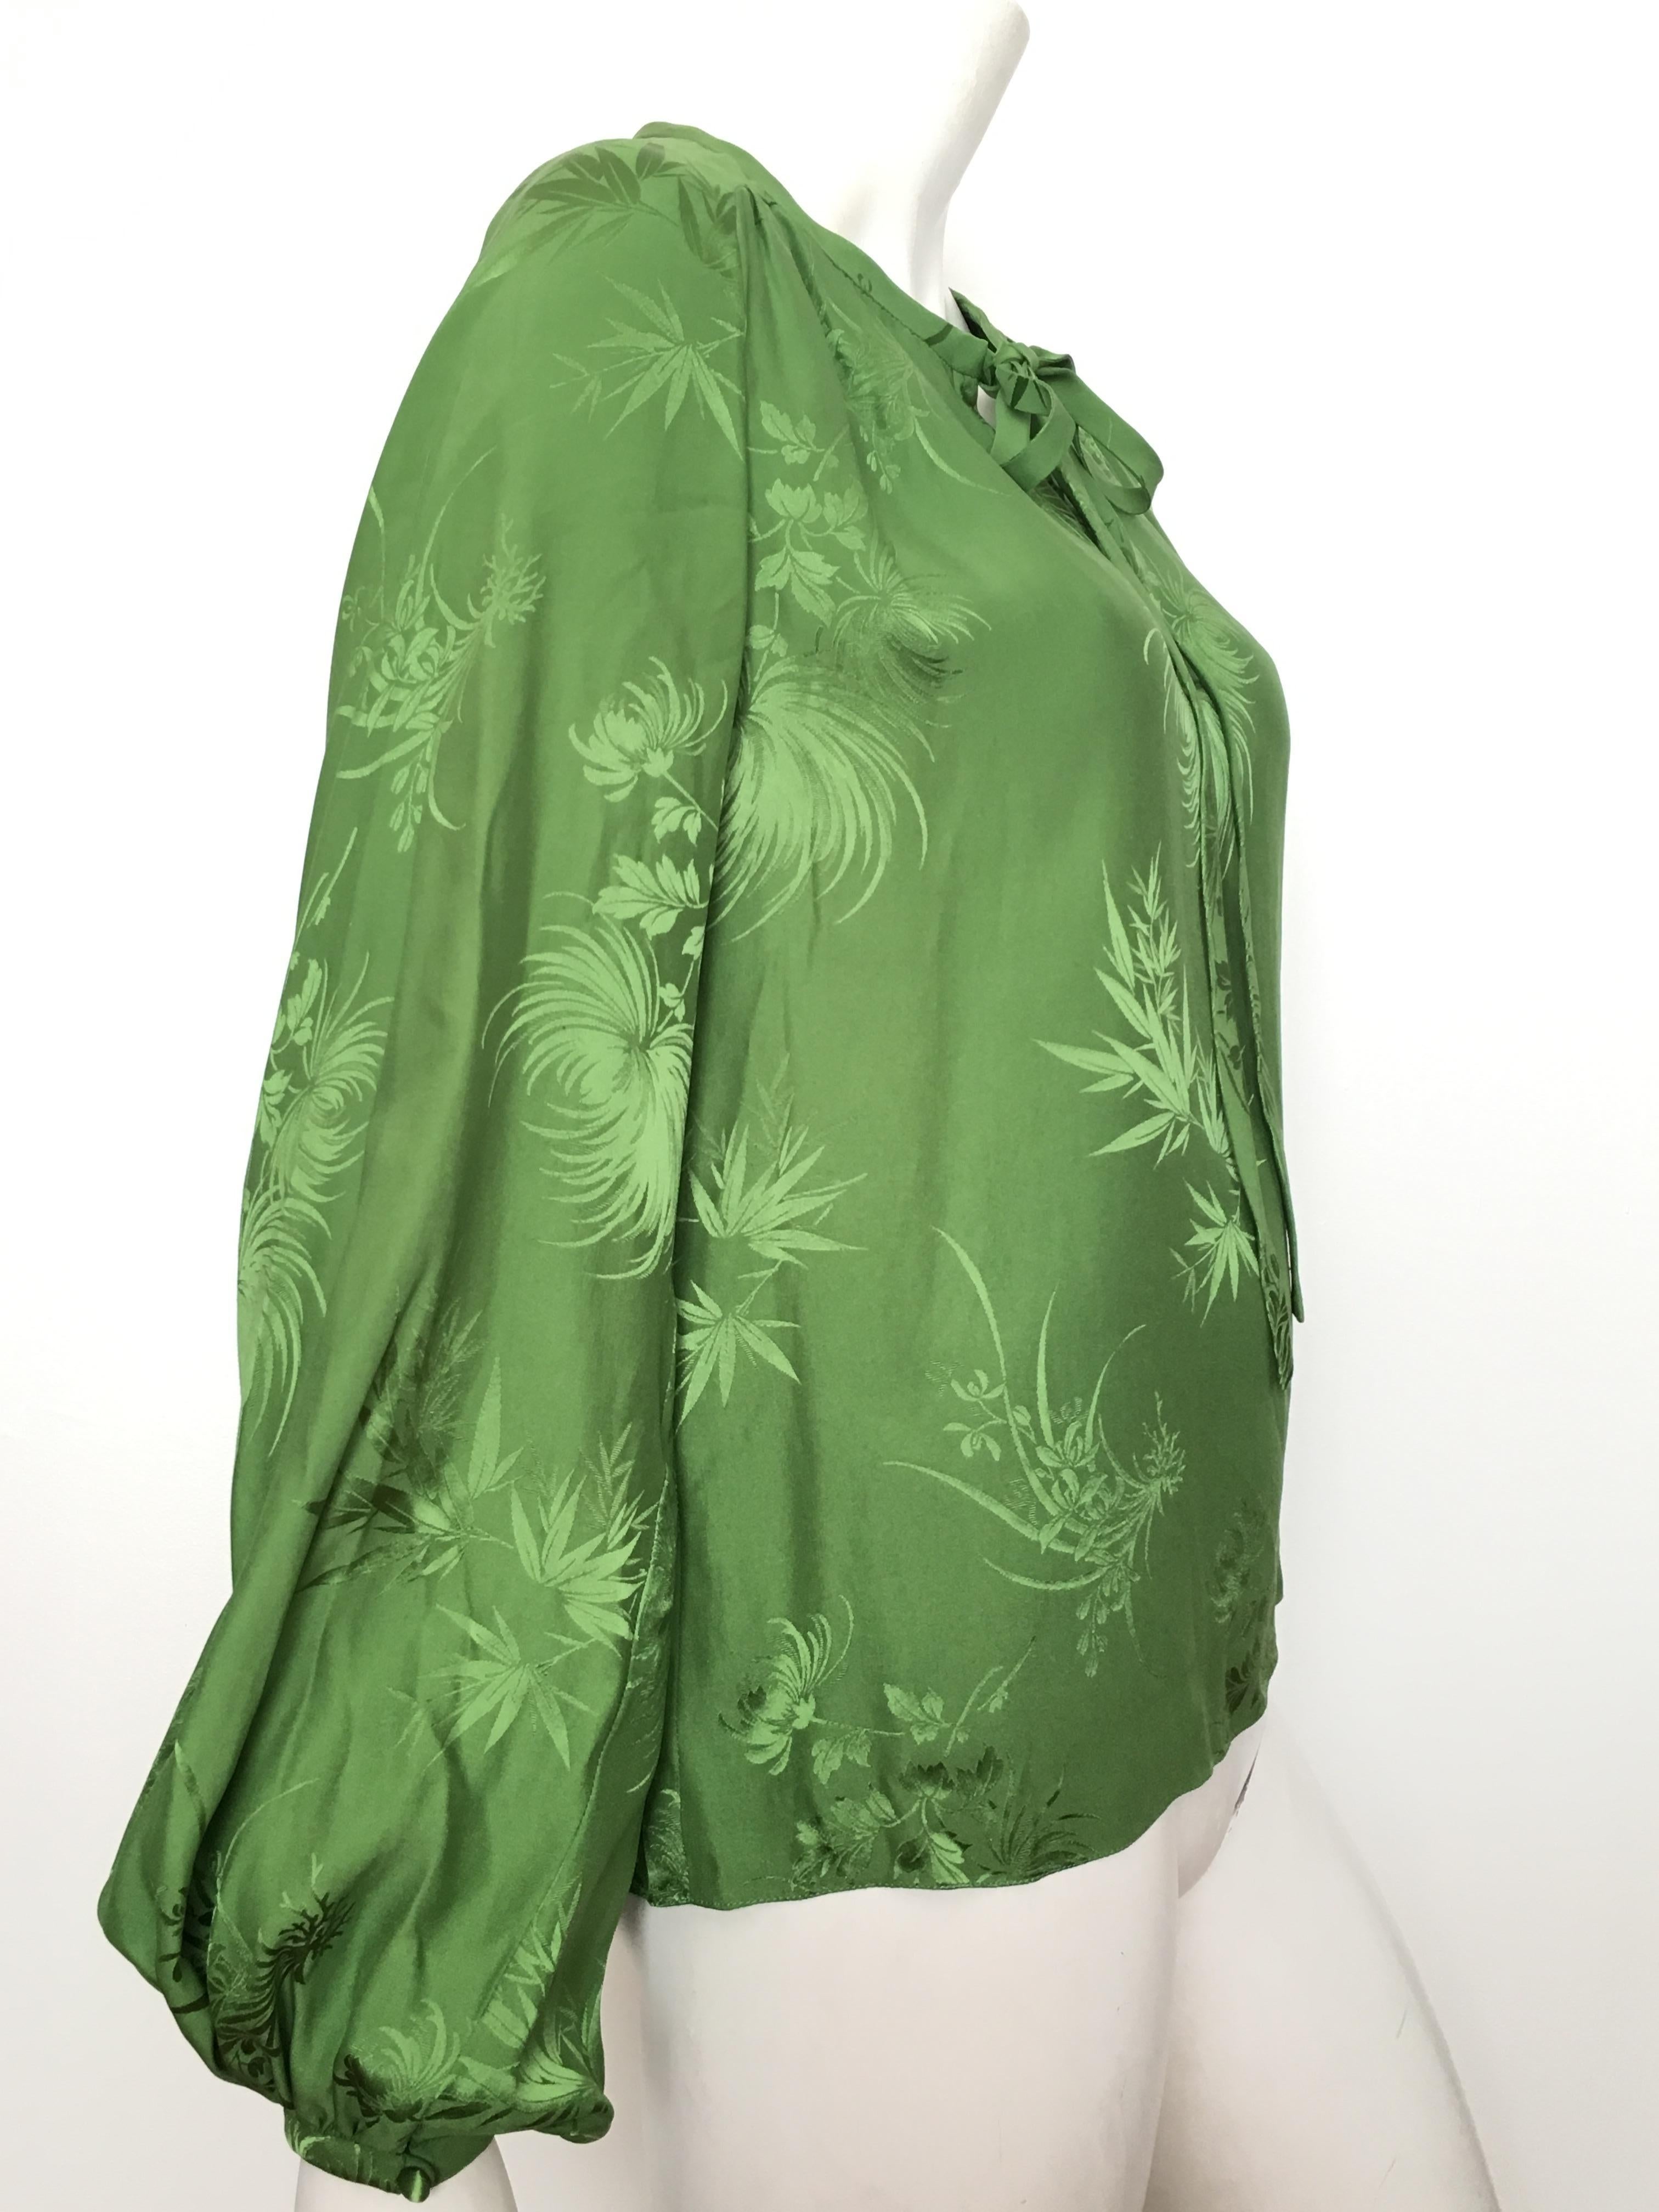 Malcolm Starr 1970s Green Silk Long Sleeve Blouse Size 6/8. For Sale 2